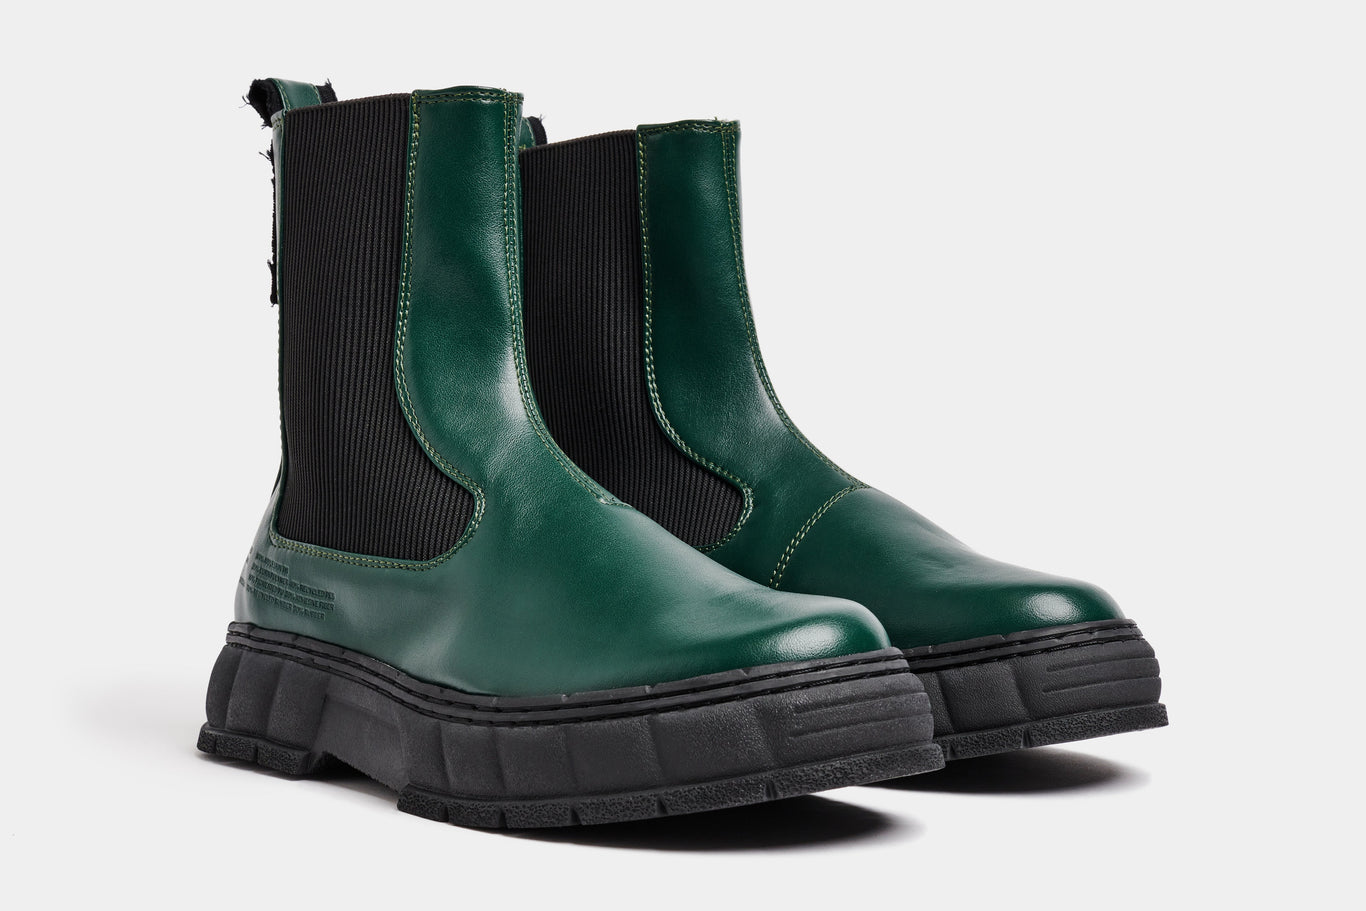 Virón 1997 Forest Apple Chelsea Boots